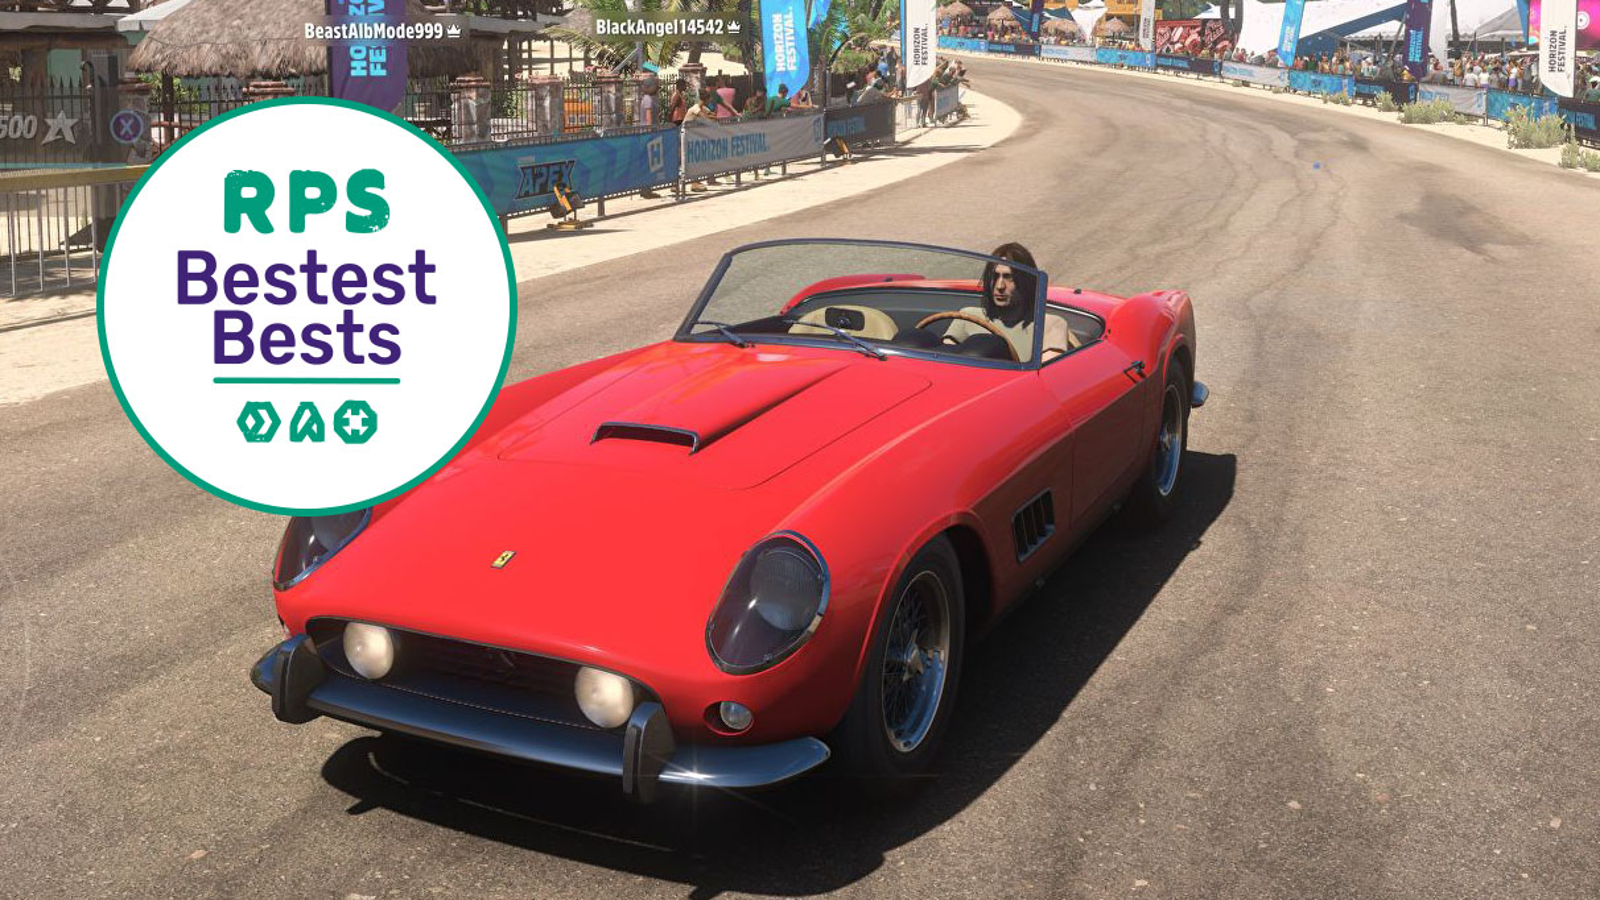 Forza Horizon 4 is the best open-world driving game you can buy